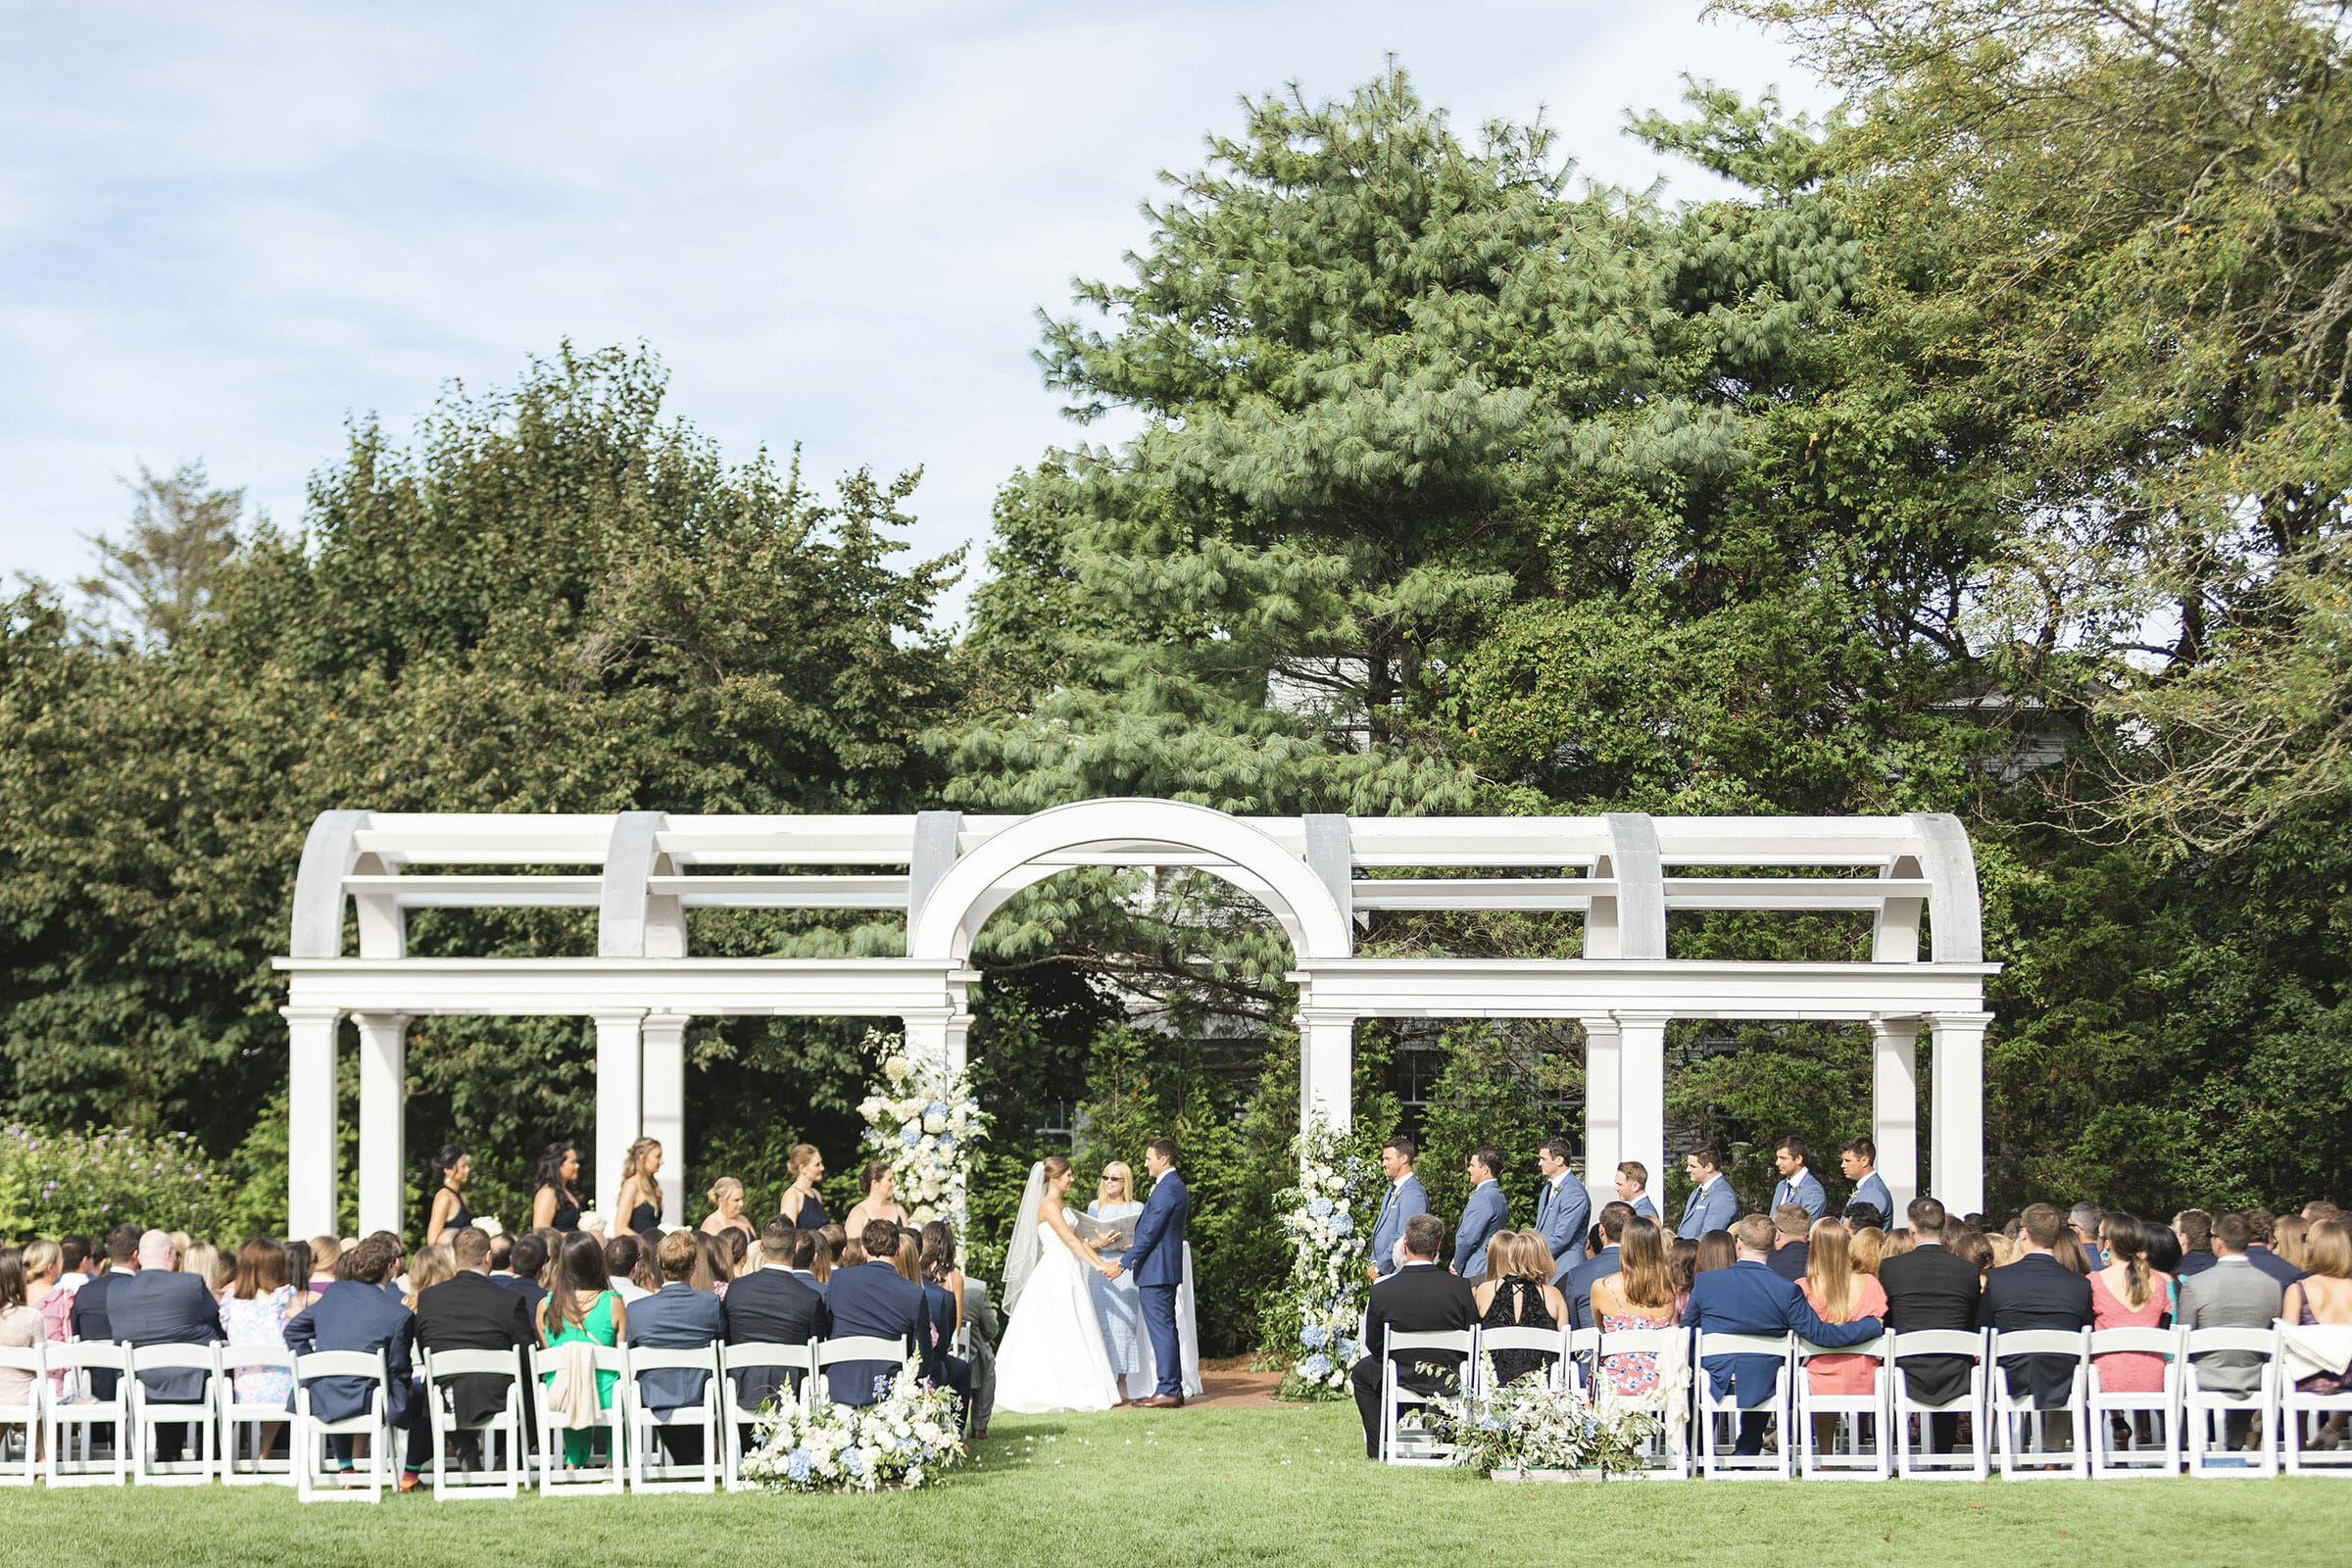 white chairs and people sitting in them with a couple standing in front of a white pergola